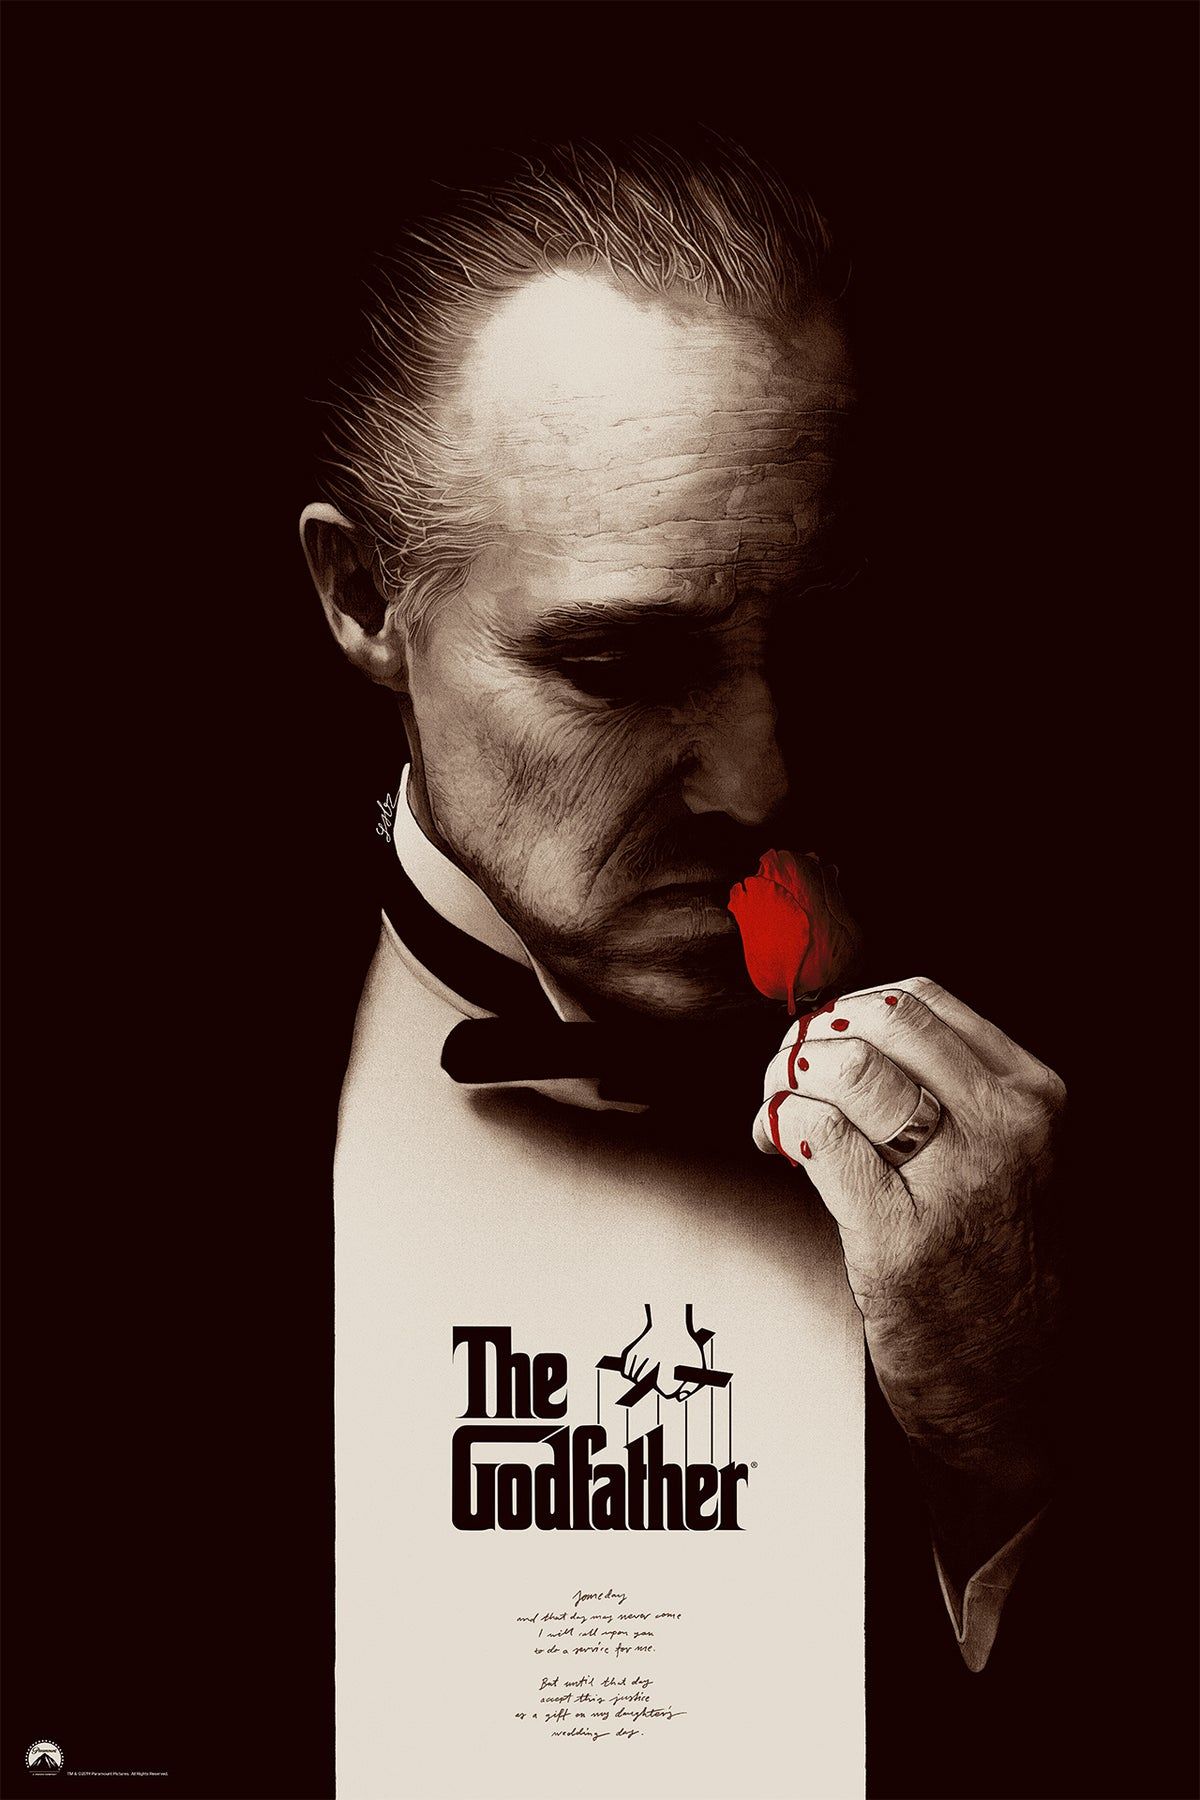 Products. The godfather poster, The godfather, Movie posters